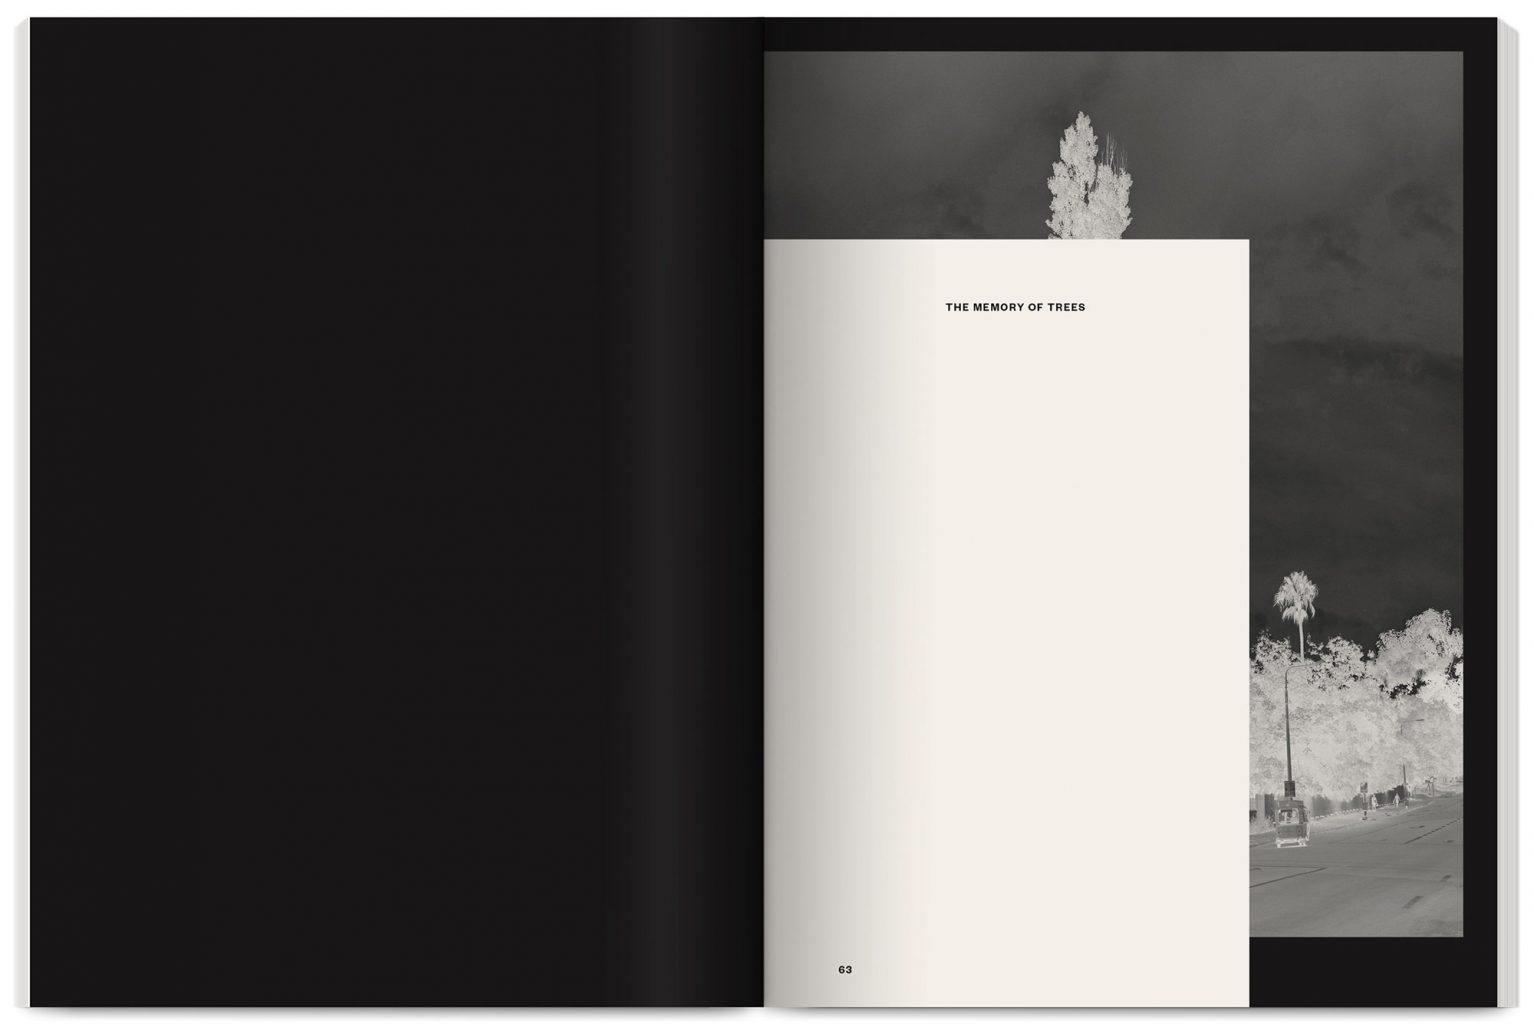 Publication Theatrum Botanicum edited by Uriel Orlow, Shela Sheikh, published by Sternberg Press, with The Showroom Gallery, designed by In the shade of a tree studio, founded by Sophie Demay and Maël Fournier Comte.